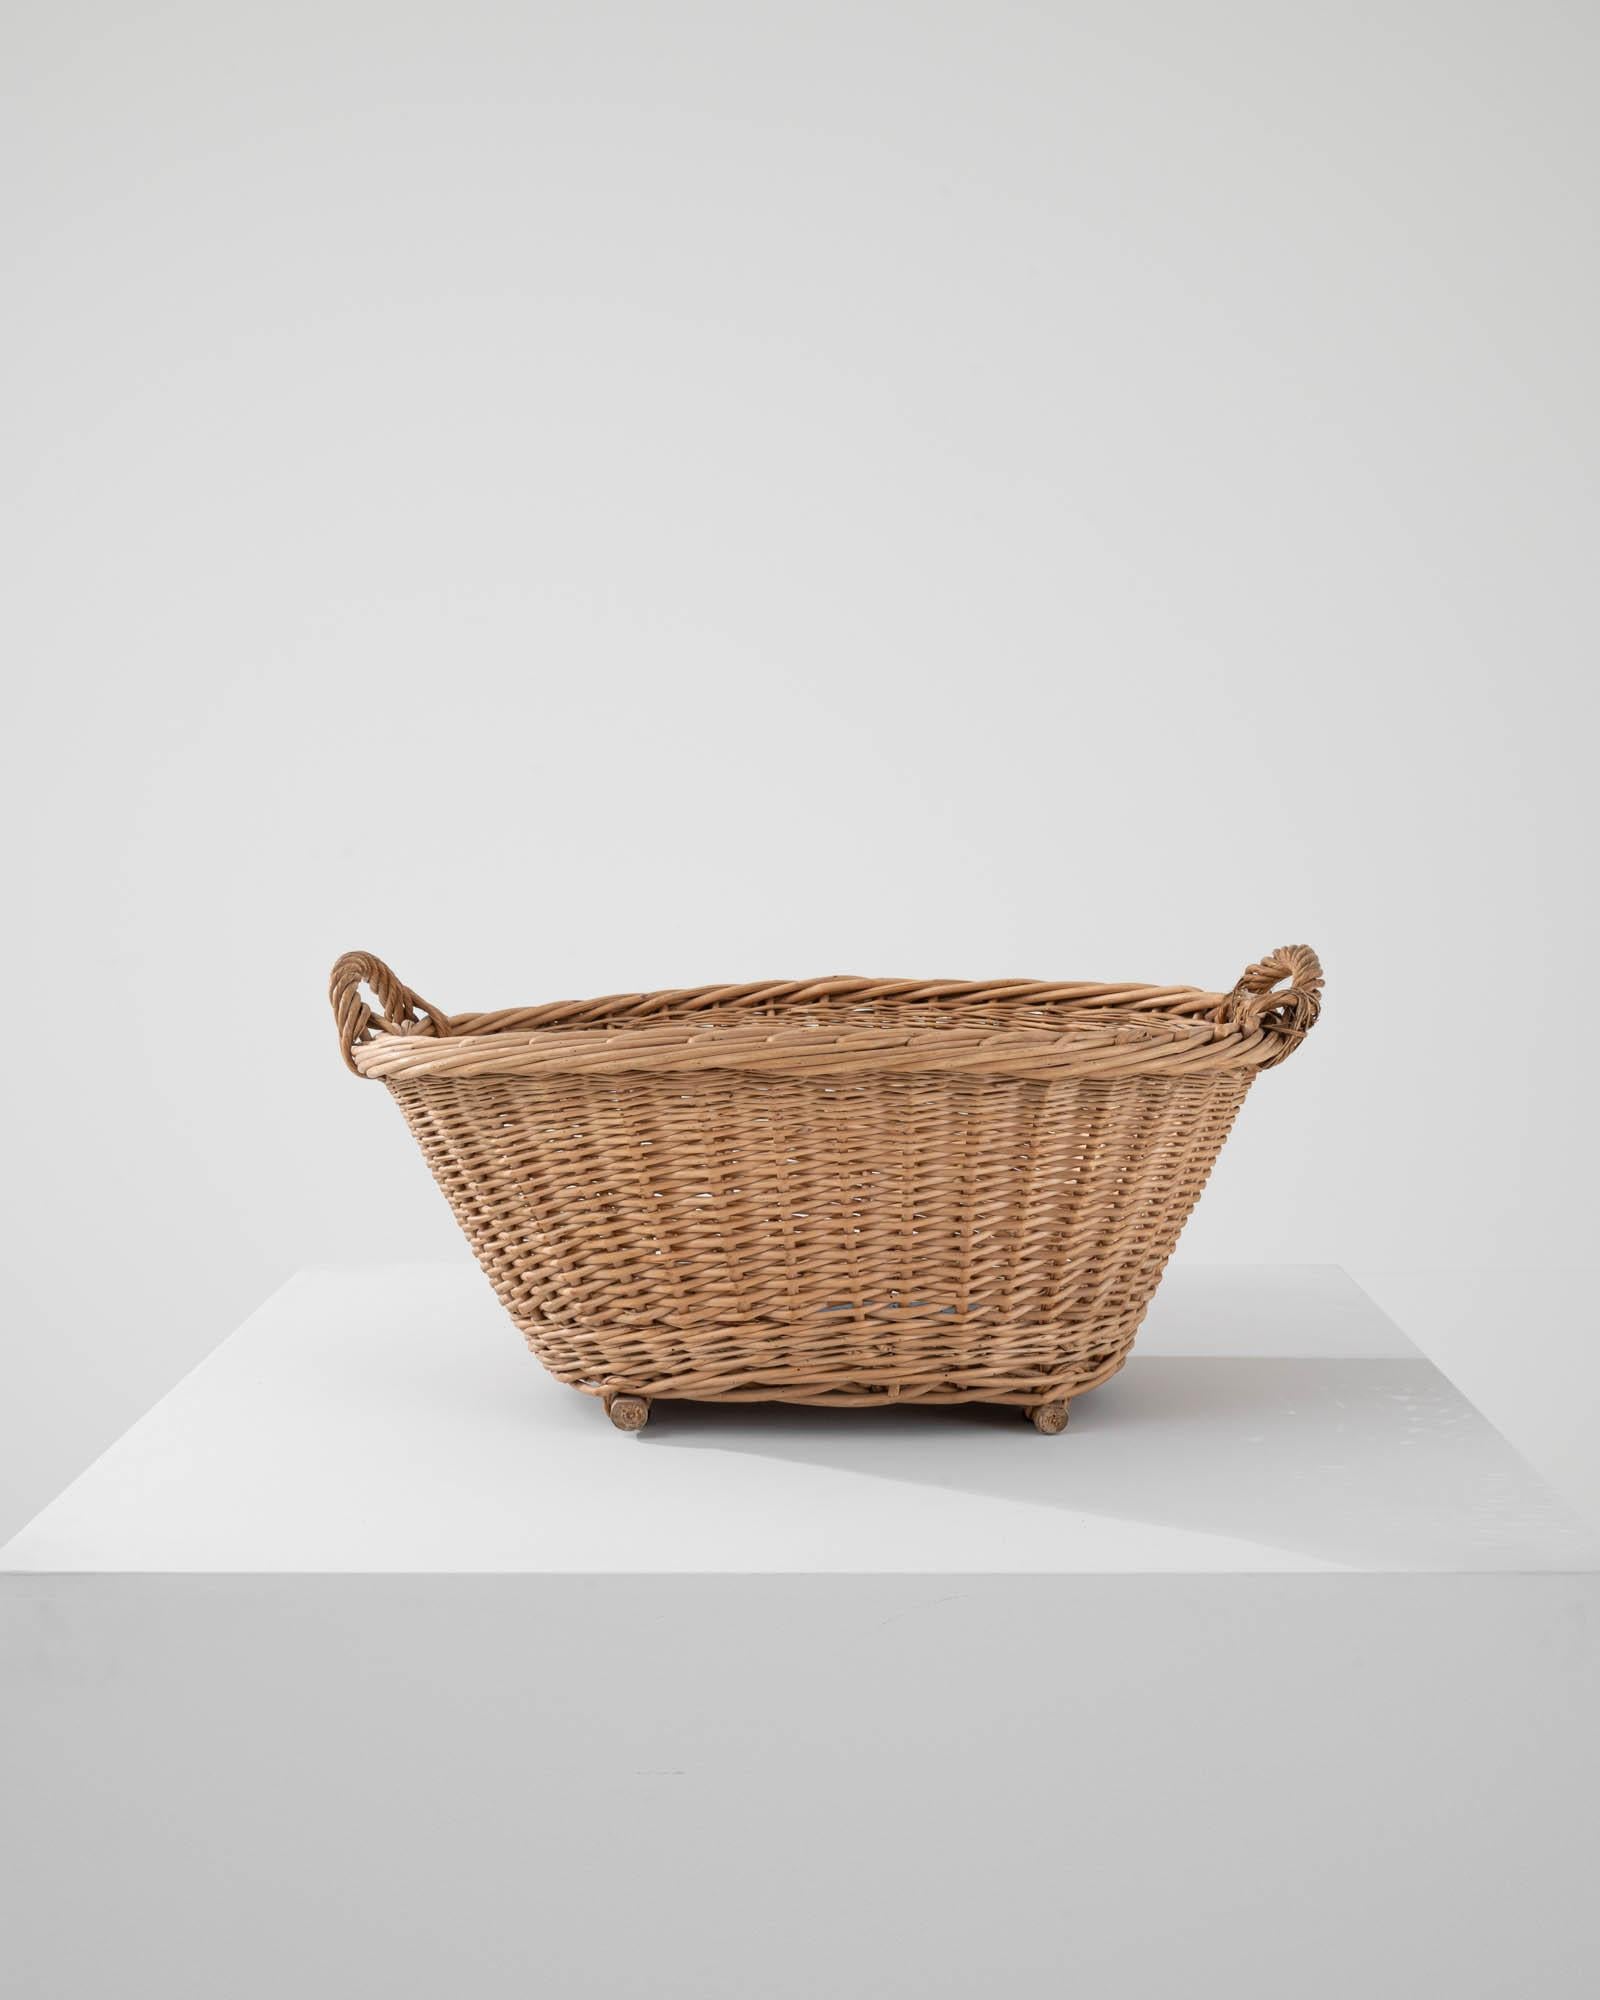 Hand-woven in France in the early 20th century, this wicker basket boasts a practical shape while the craftsmanship of the weaving technique imparts a sense of rustic coziness.Light and easily transportable, this classic wicker basket is ready to